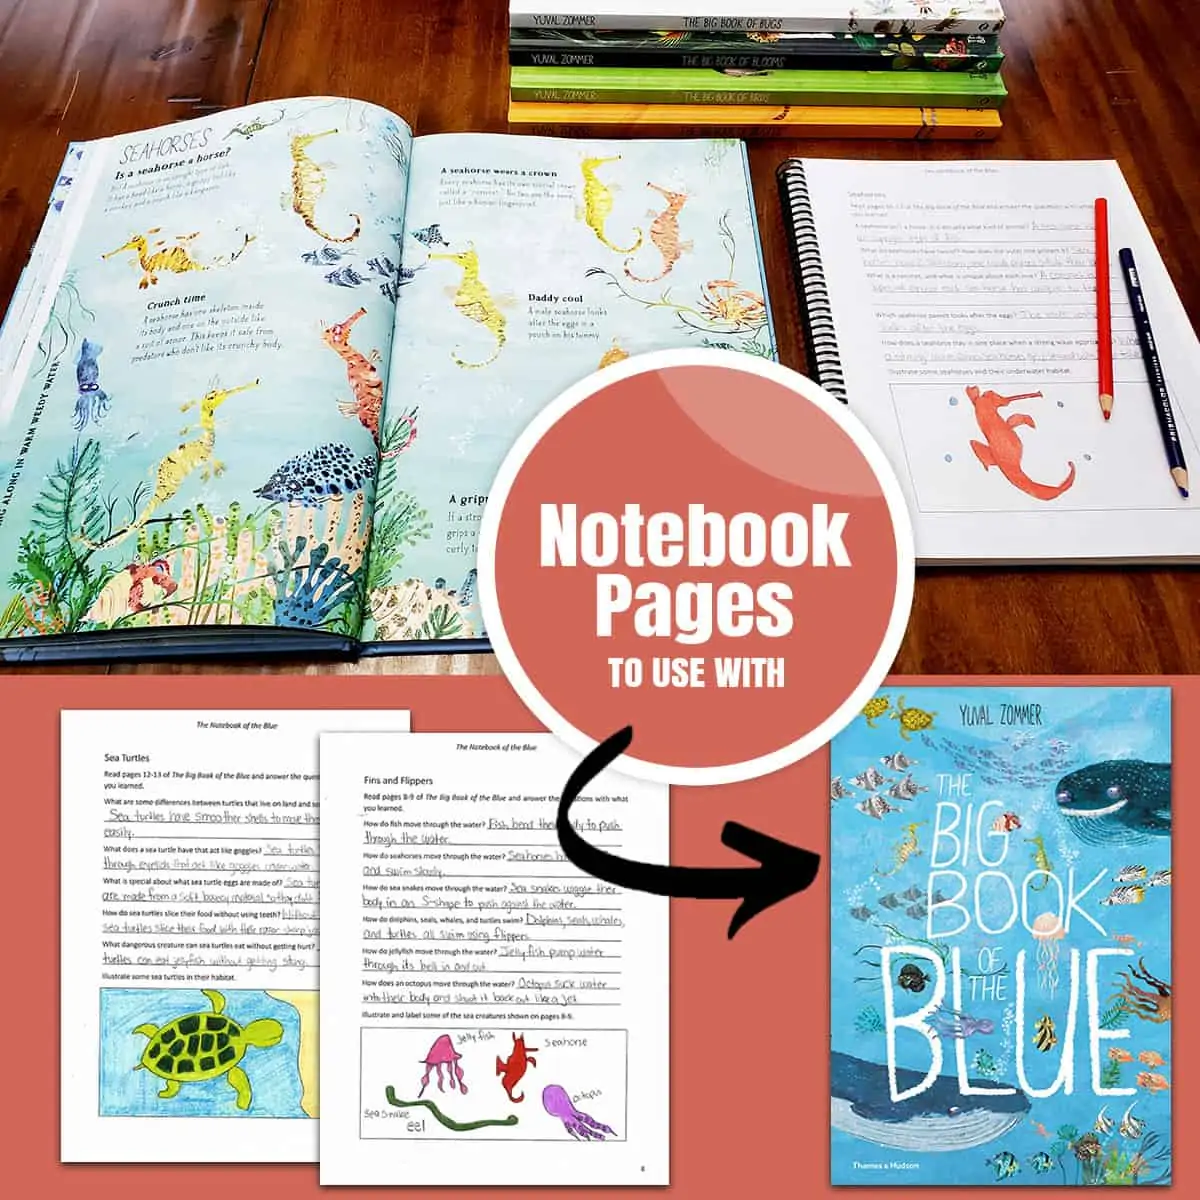 the Big Book of the Blue and note booking pages